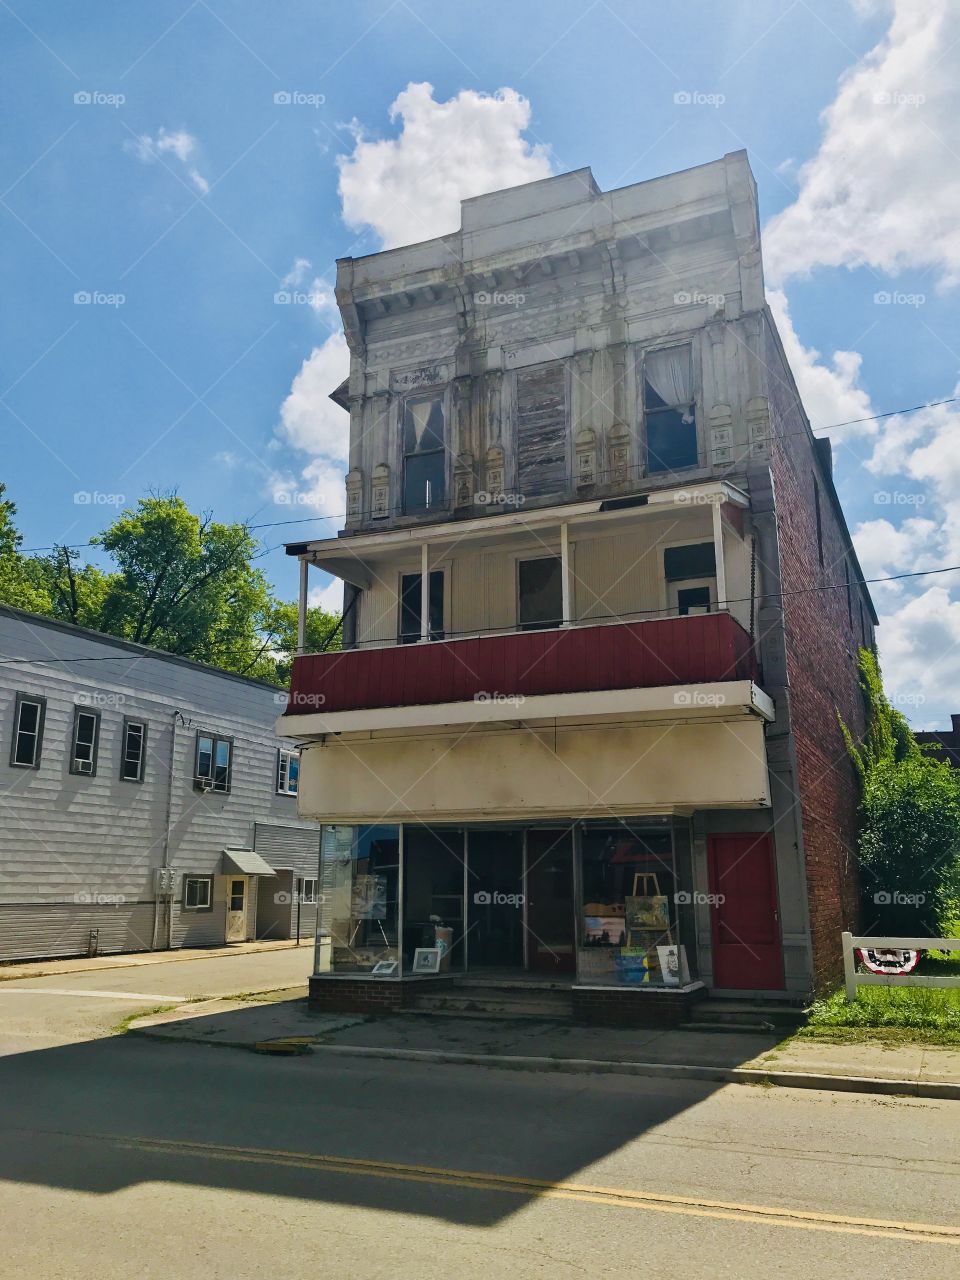 Old building in a small town